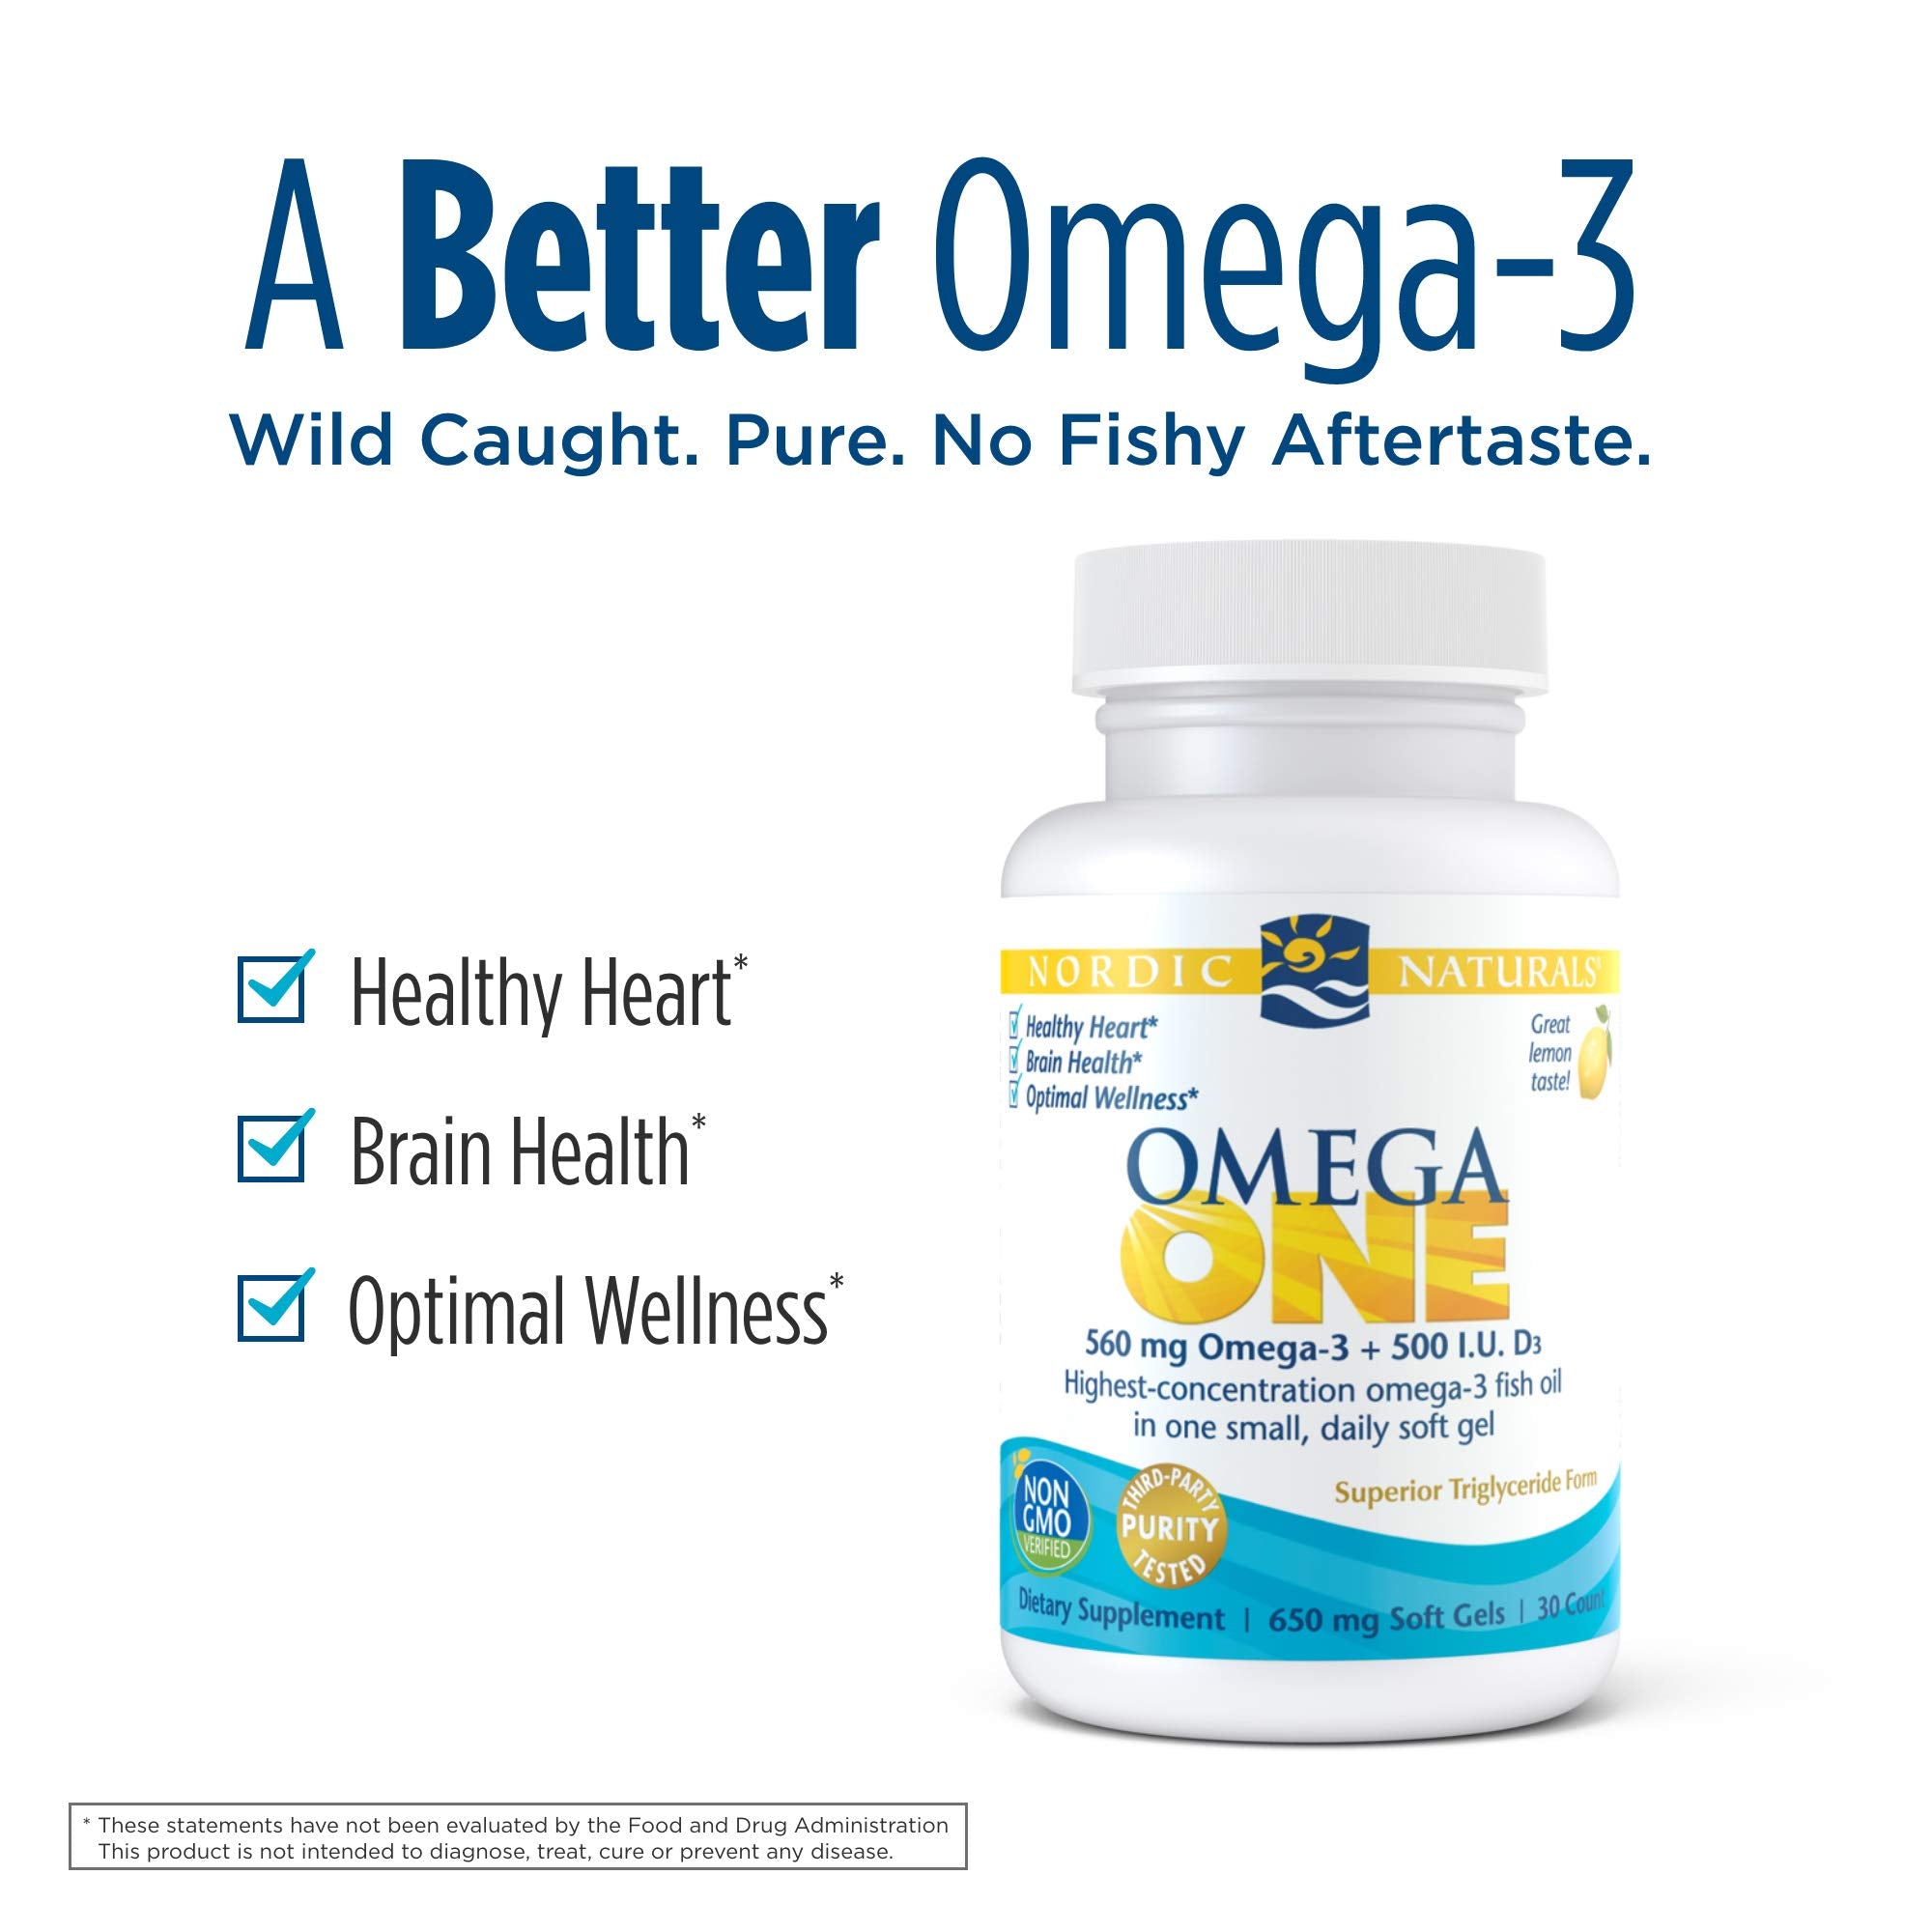 Nordic Naturals Omega ONE, Lemon Flavor - 560 mg Omega-3 + 500 IU Vitamin D3-30 Count - High-Potency Fish Oil in ONE Easy to Take Soft Gel - Brain, Eye & Heart Health - Non-GMO - 30 Servings